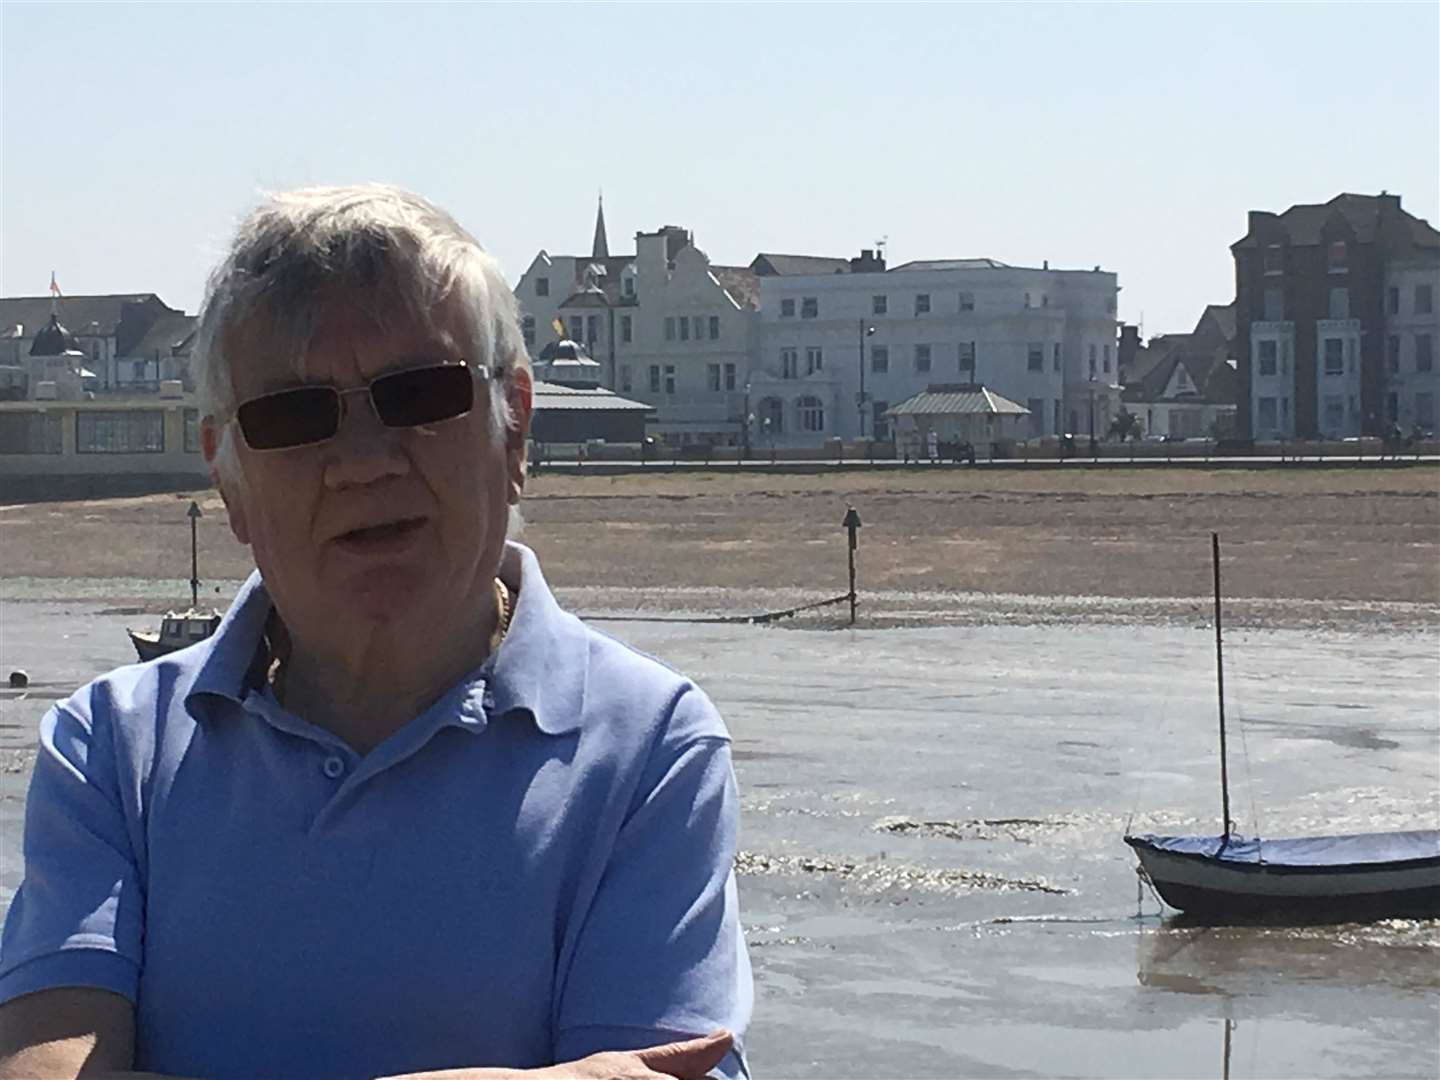 Brian moved to Herne Bay in 2018, where Alison says he "loved his place by the sea"